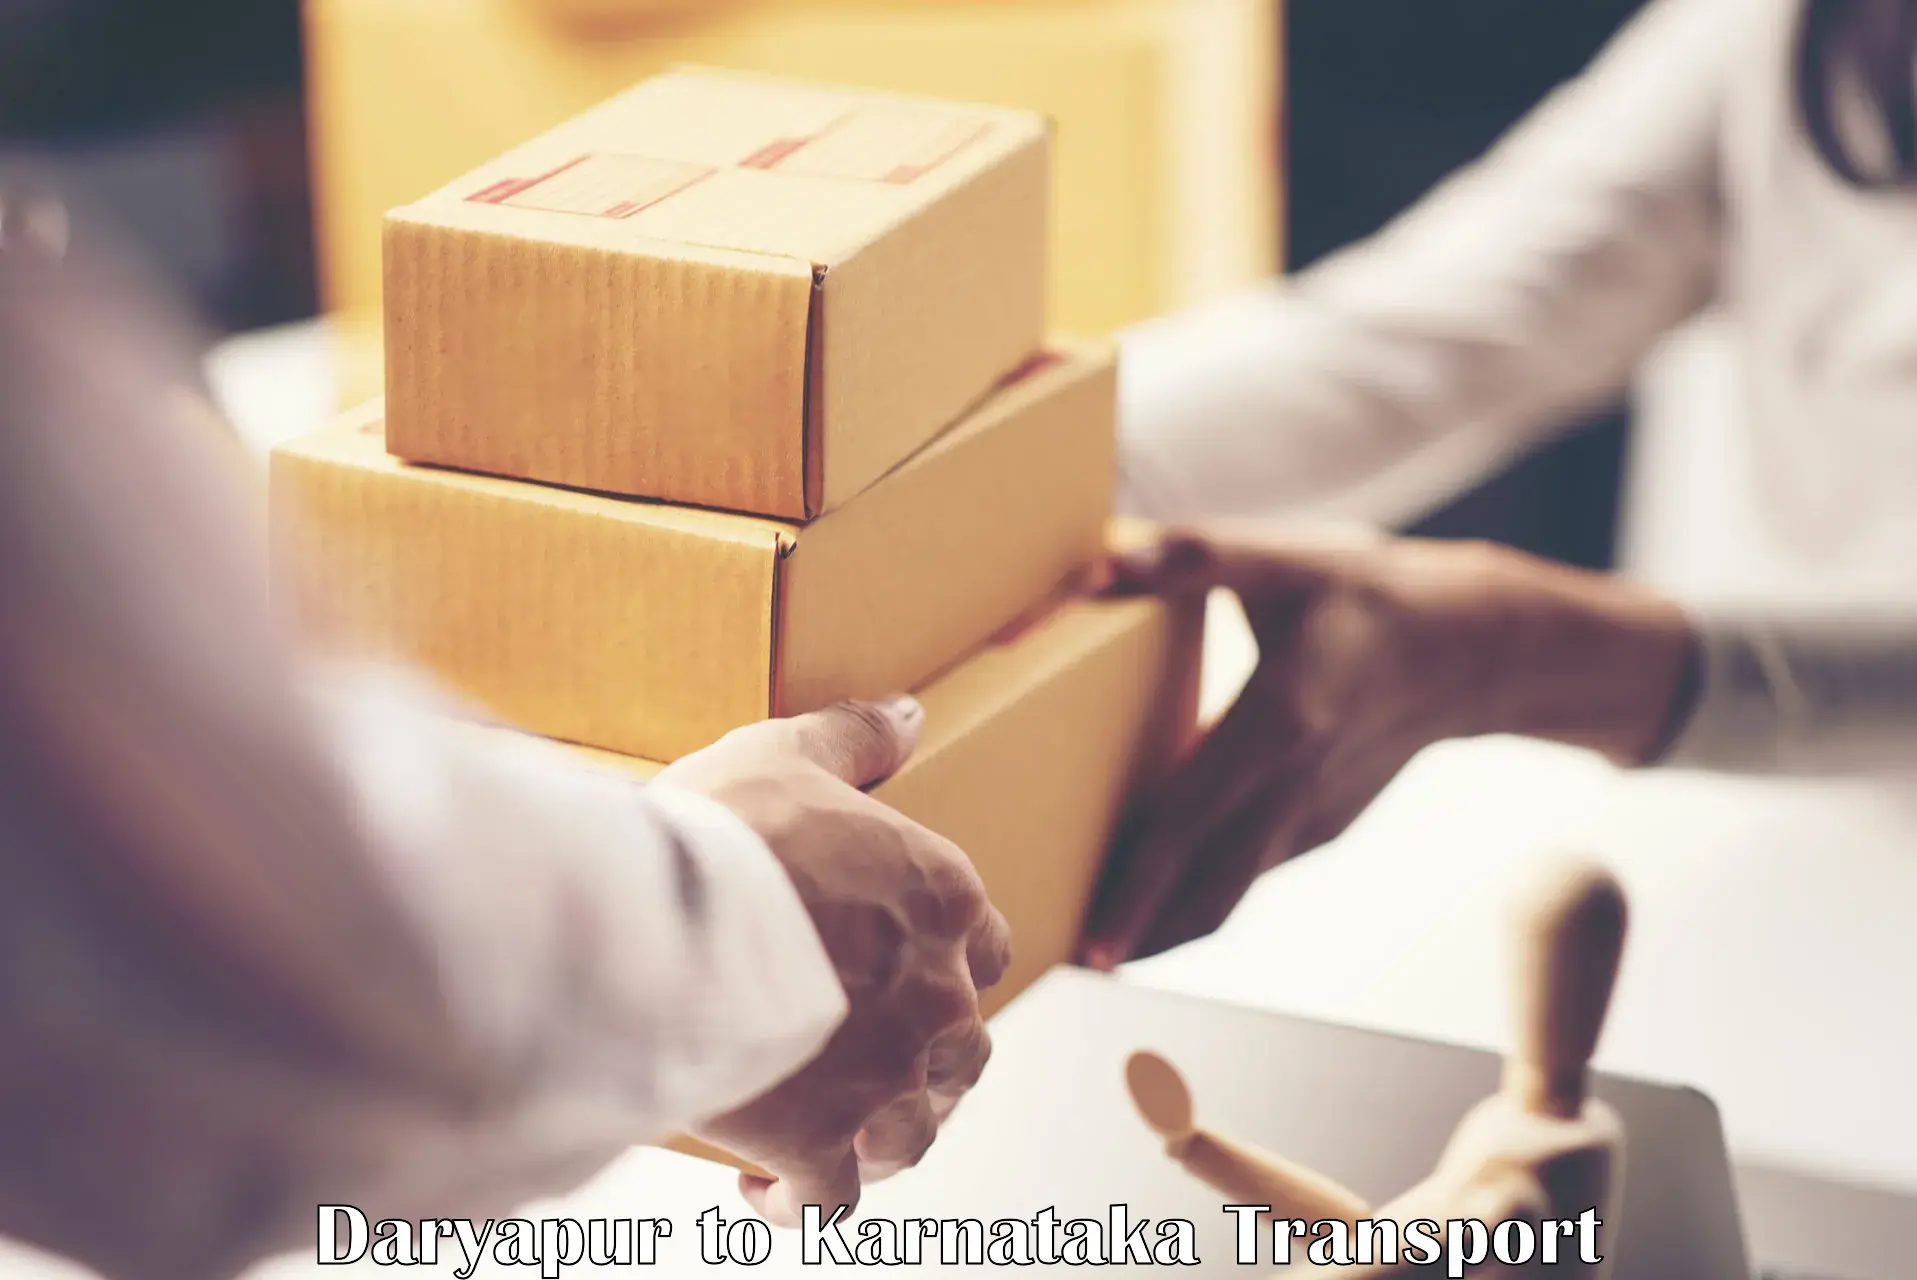 Package delivery services Daryapur to Yenepoya Mangalore